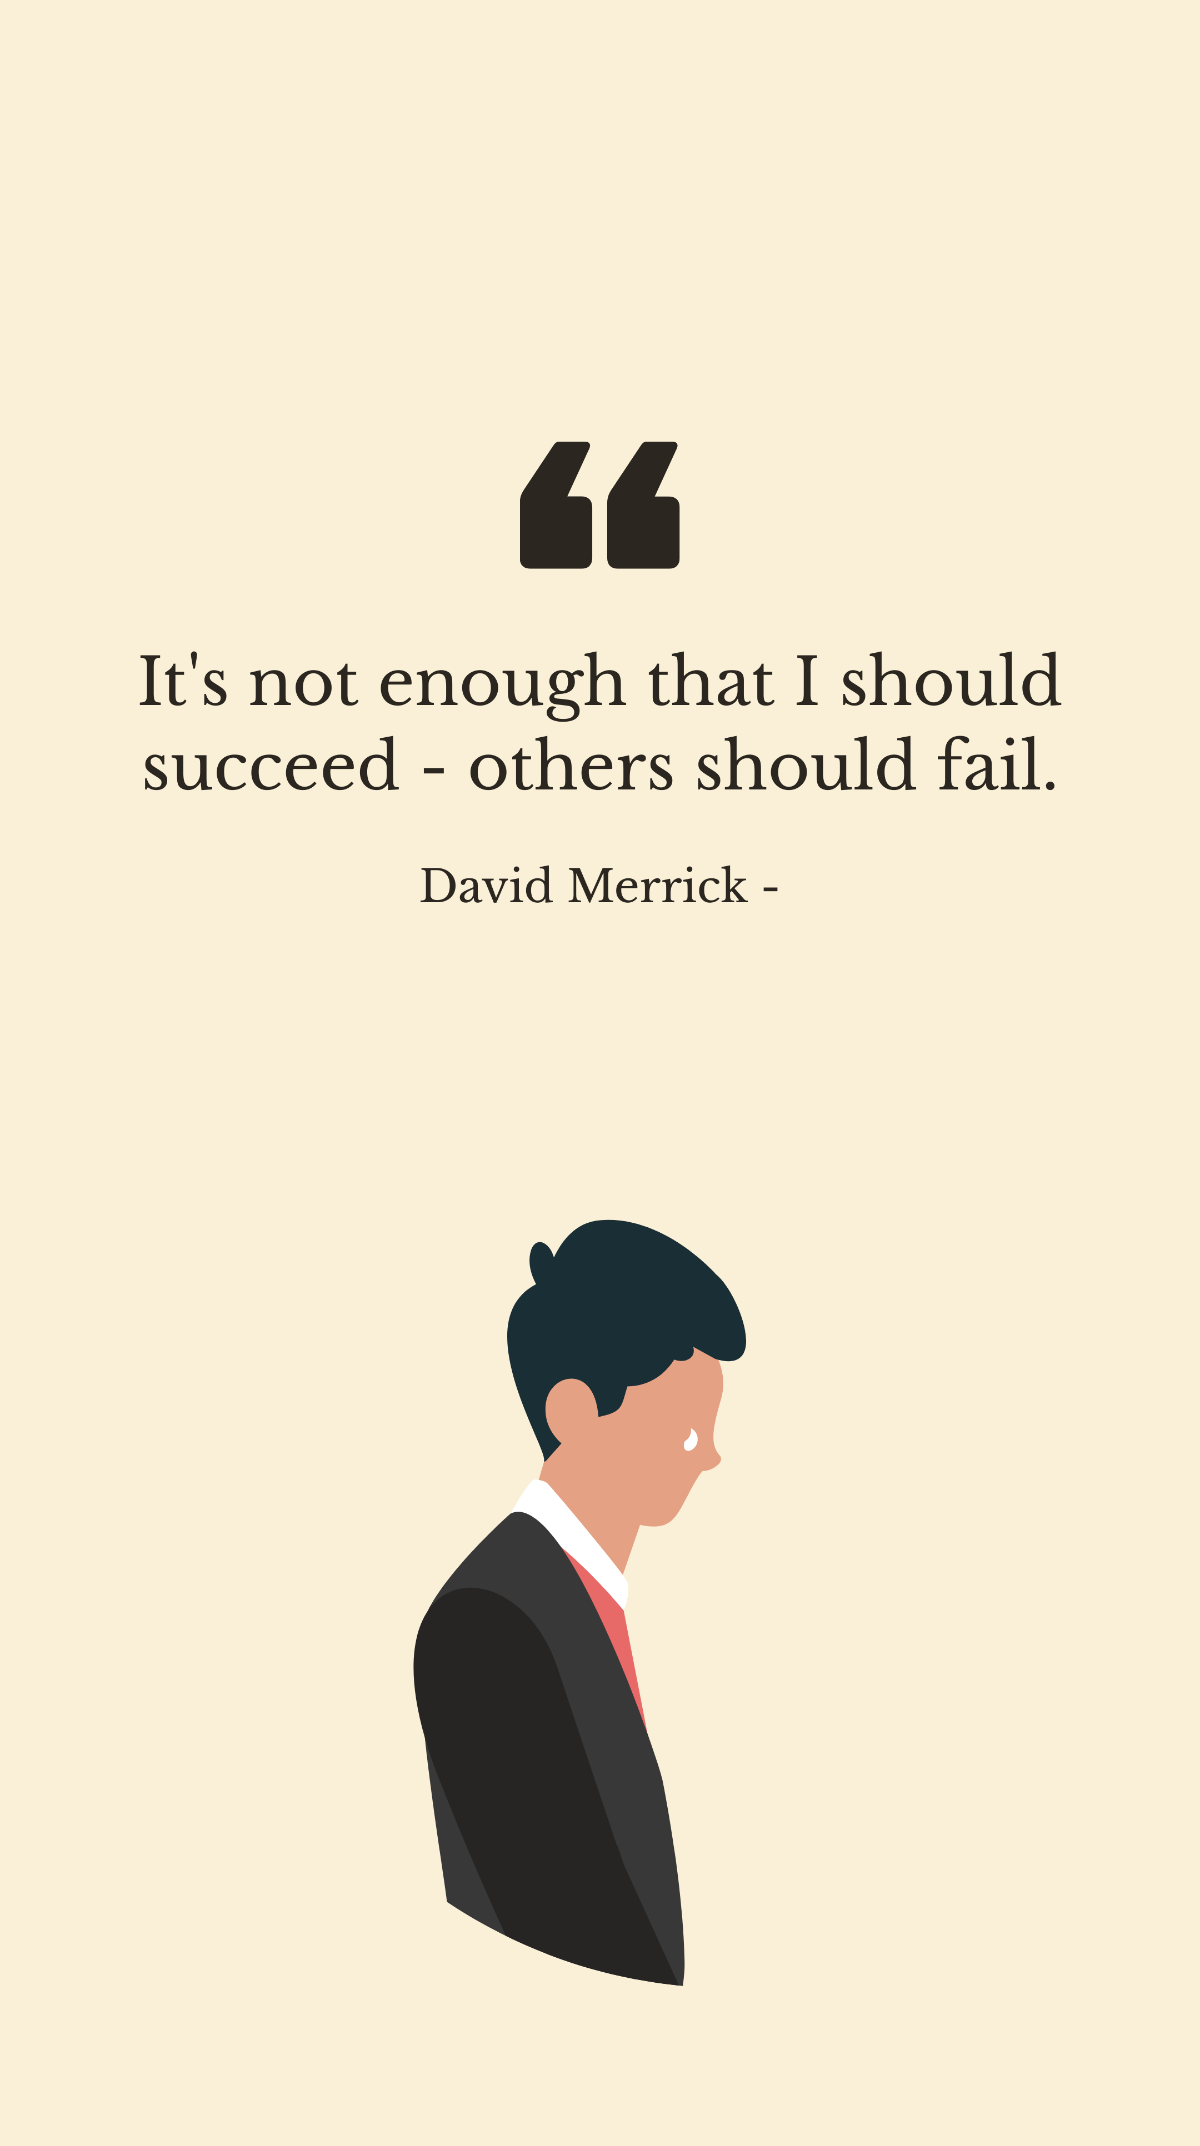 David Merrick - It's not enough that I should succeed - others should fail. Template